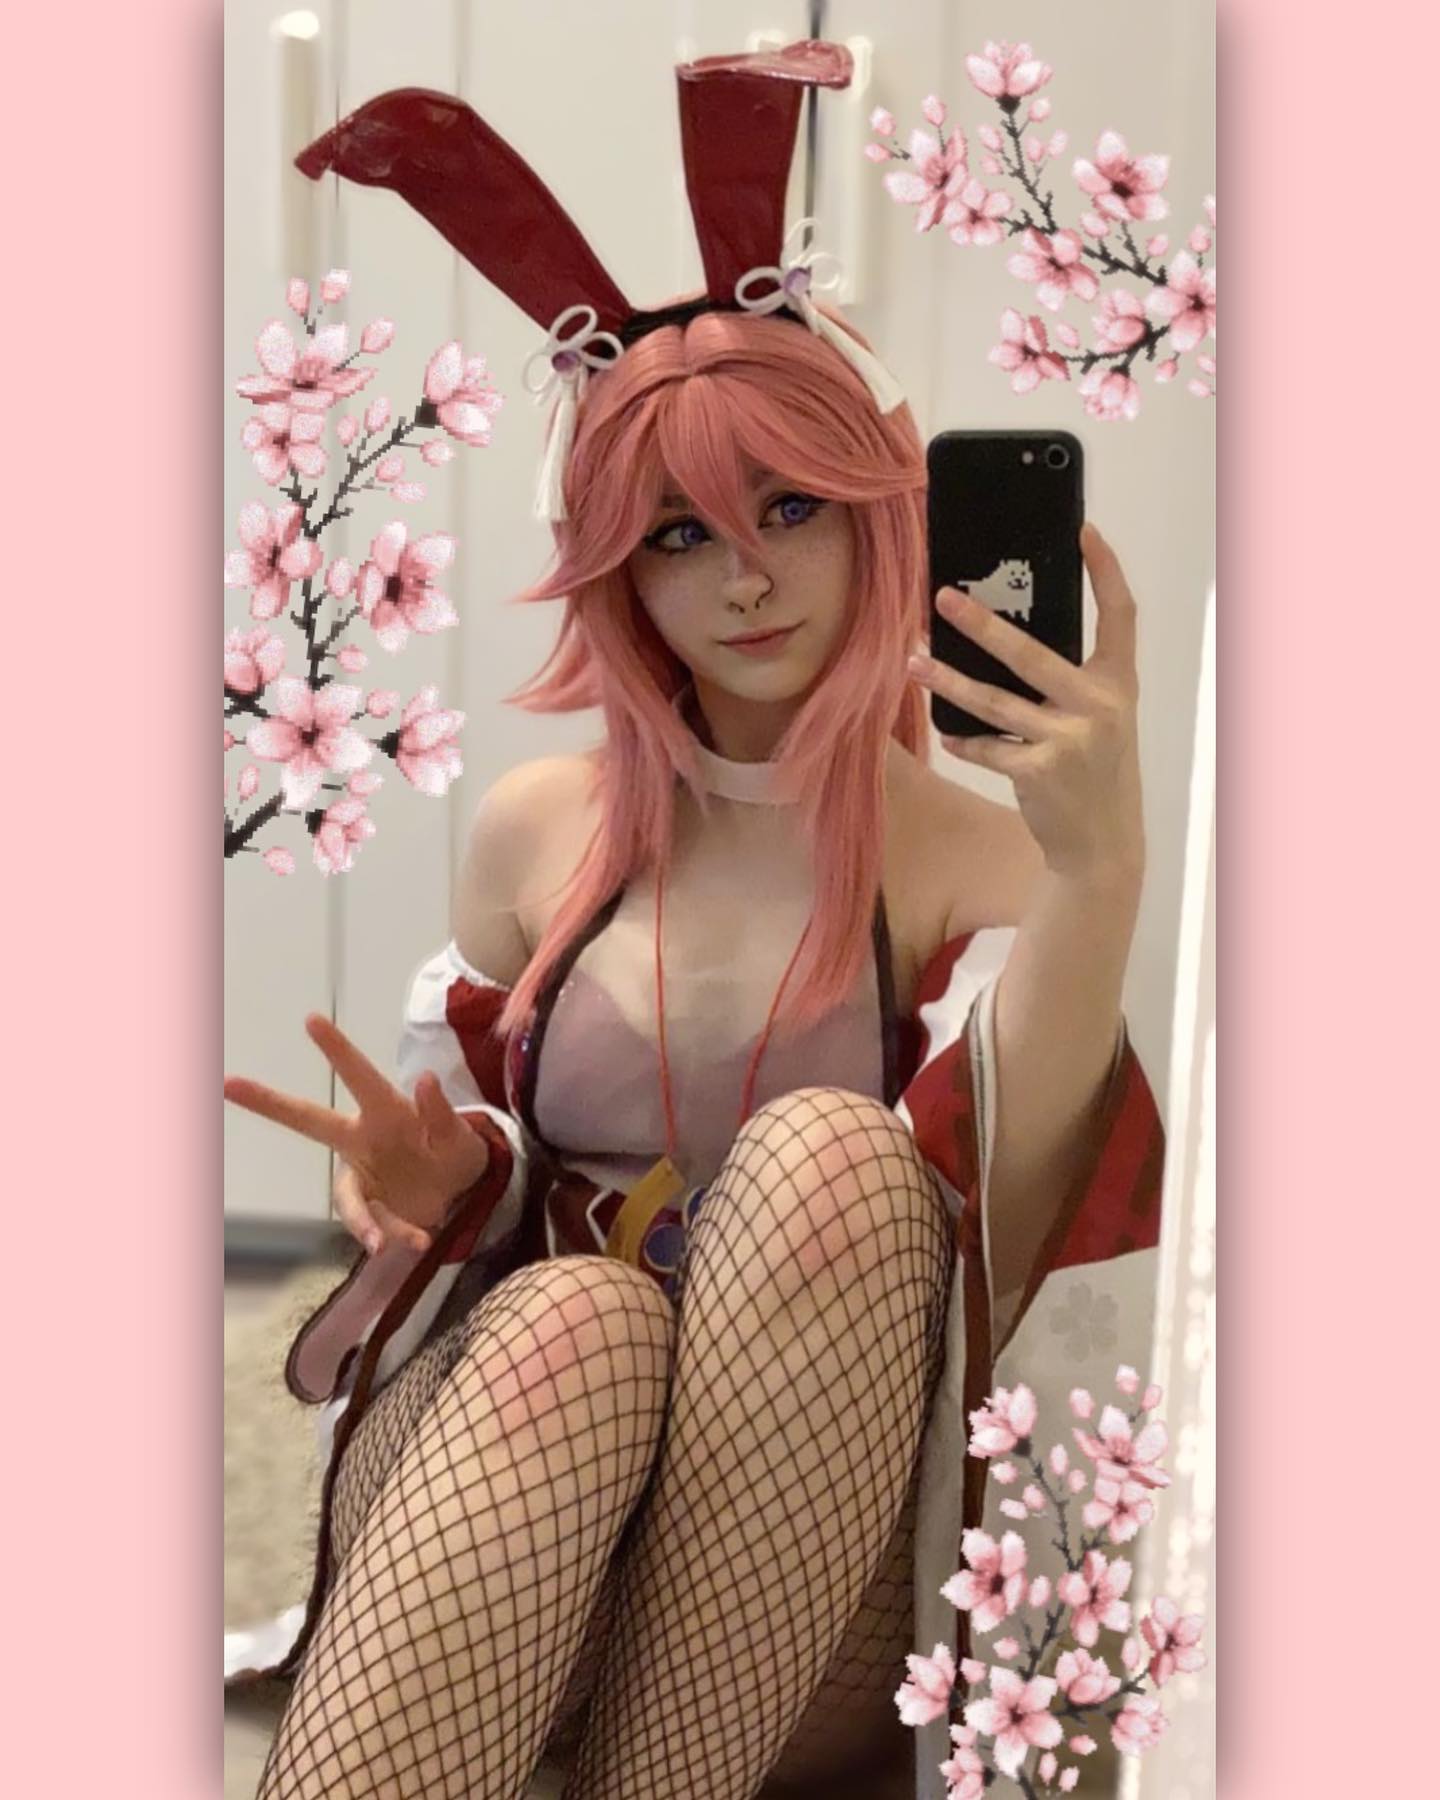 bunny yae miko 🌸💖
-
are you still playing genshin impact? i havent touched that game in like 3 years 😭
cant wait to see yall at lbm saturday !! ill be there as mercy from overwatch ! 🌸✨
-
tags!
-
#cosplay #cosplayer #cosplaygirl #cosplaying #yaemiko #genshinimpact #genshin #genshincosplay #genshinimpactcosplay #yaemikocosplay #yaemikoedit #genshinimpactedit #gaming #gamecosplay #viral